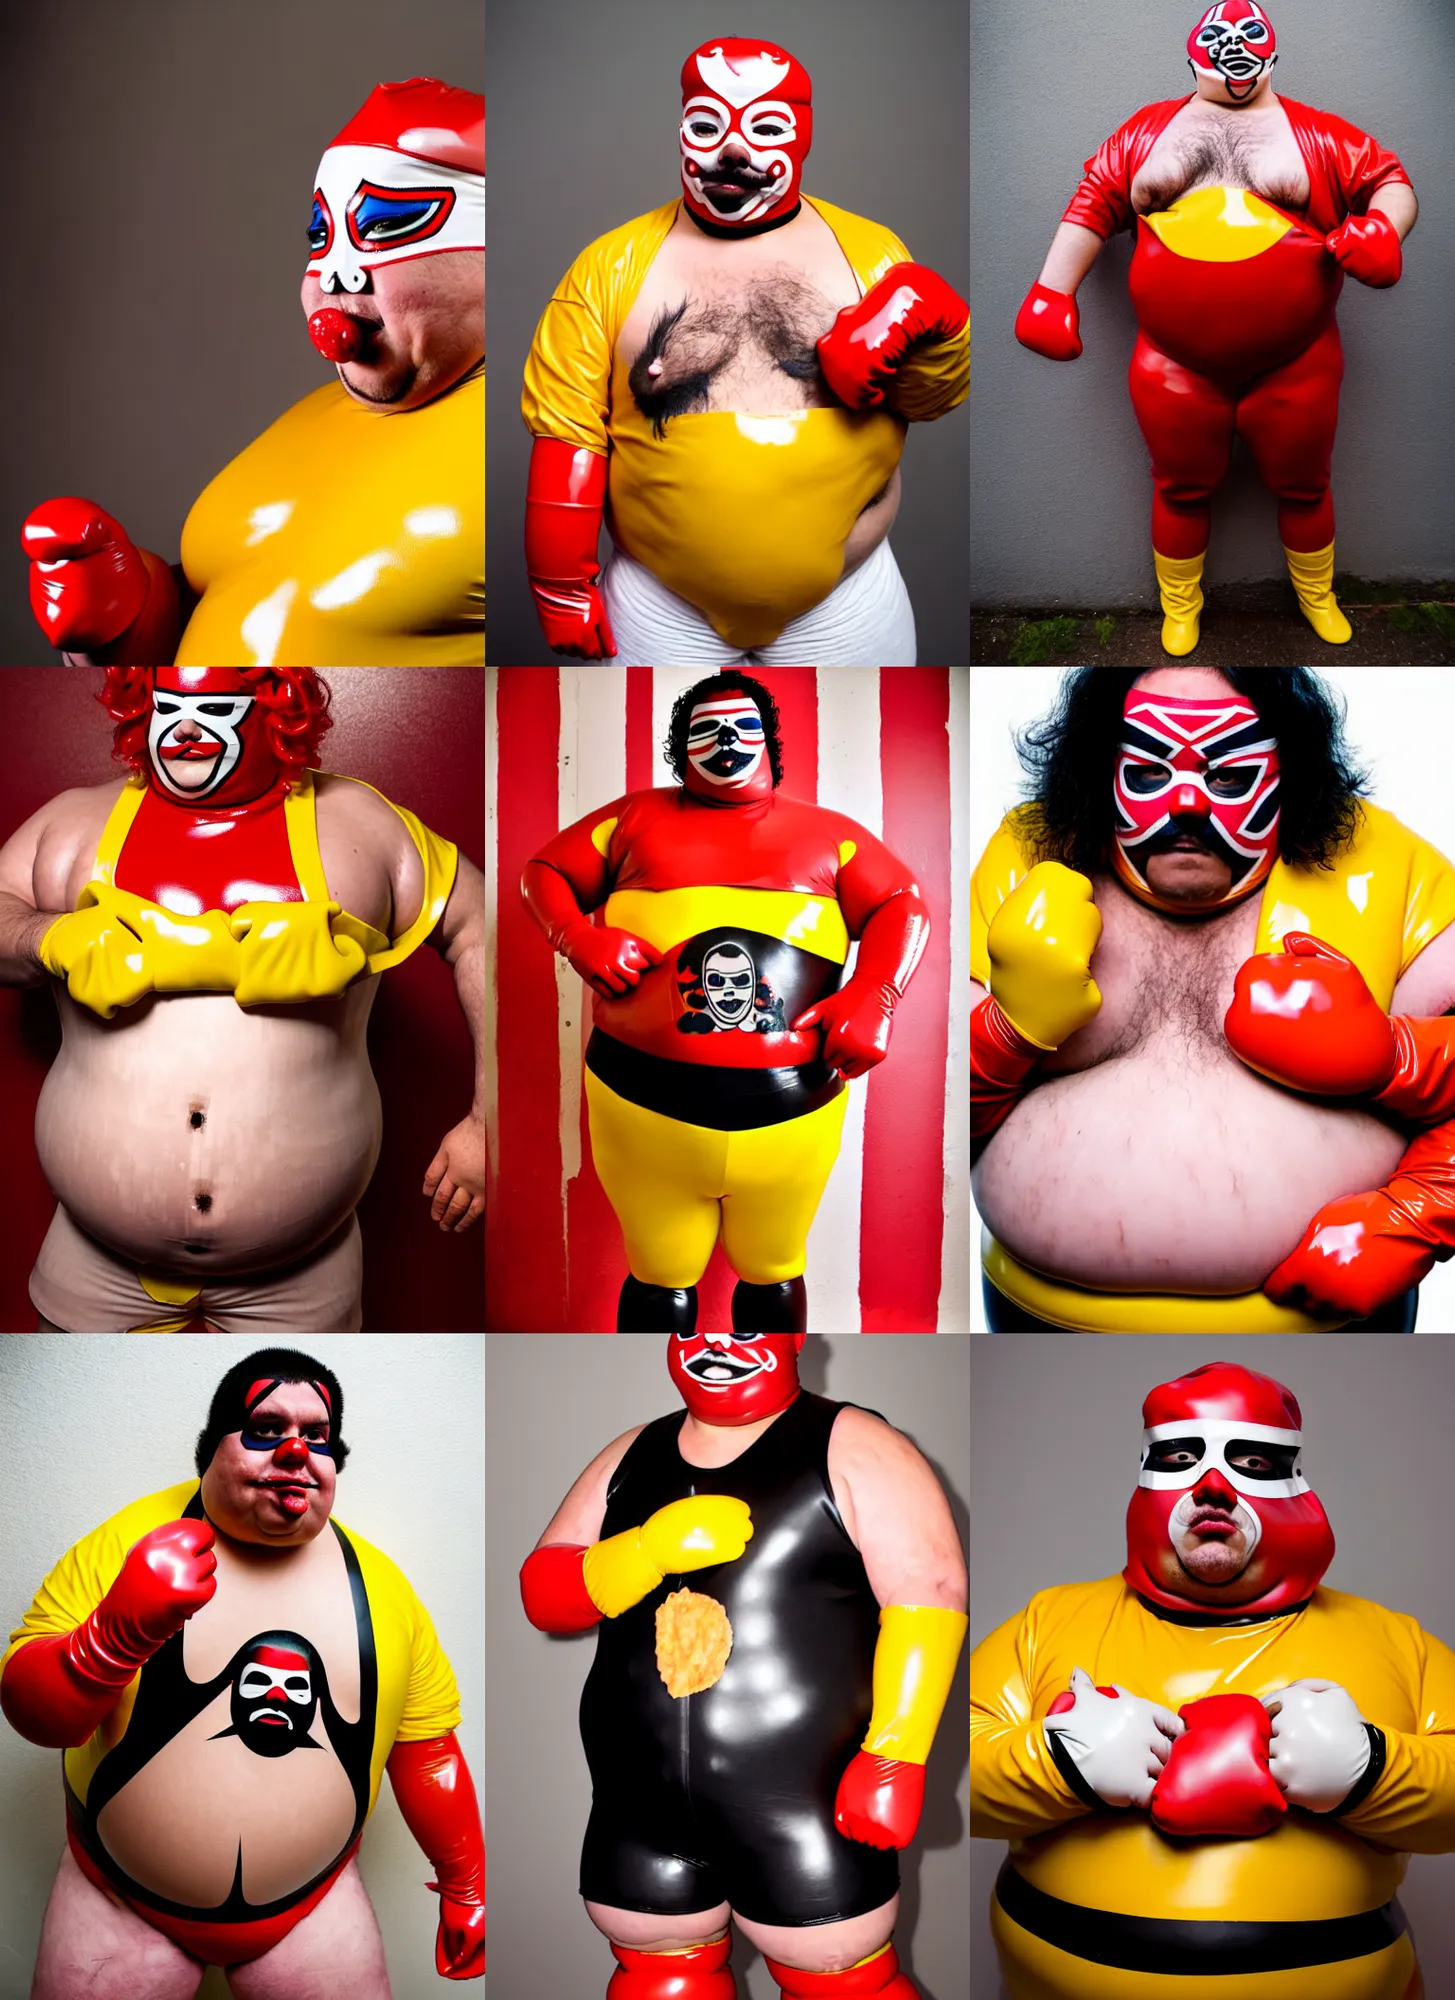 Prompt: portrait of a very chubby looking Lucha libre dressed in rubber latex costume with a hamburger tattoo on the bare hairy chest, red and white color latex sleeves, yellow latex gloves, red Ronald McDonald hair